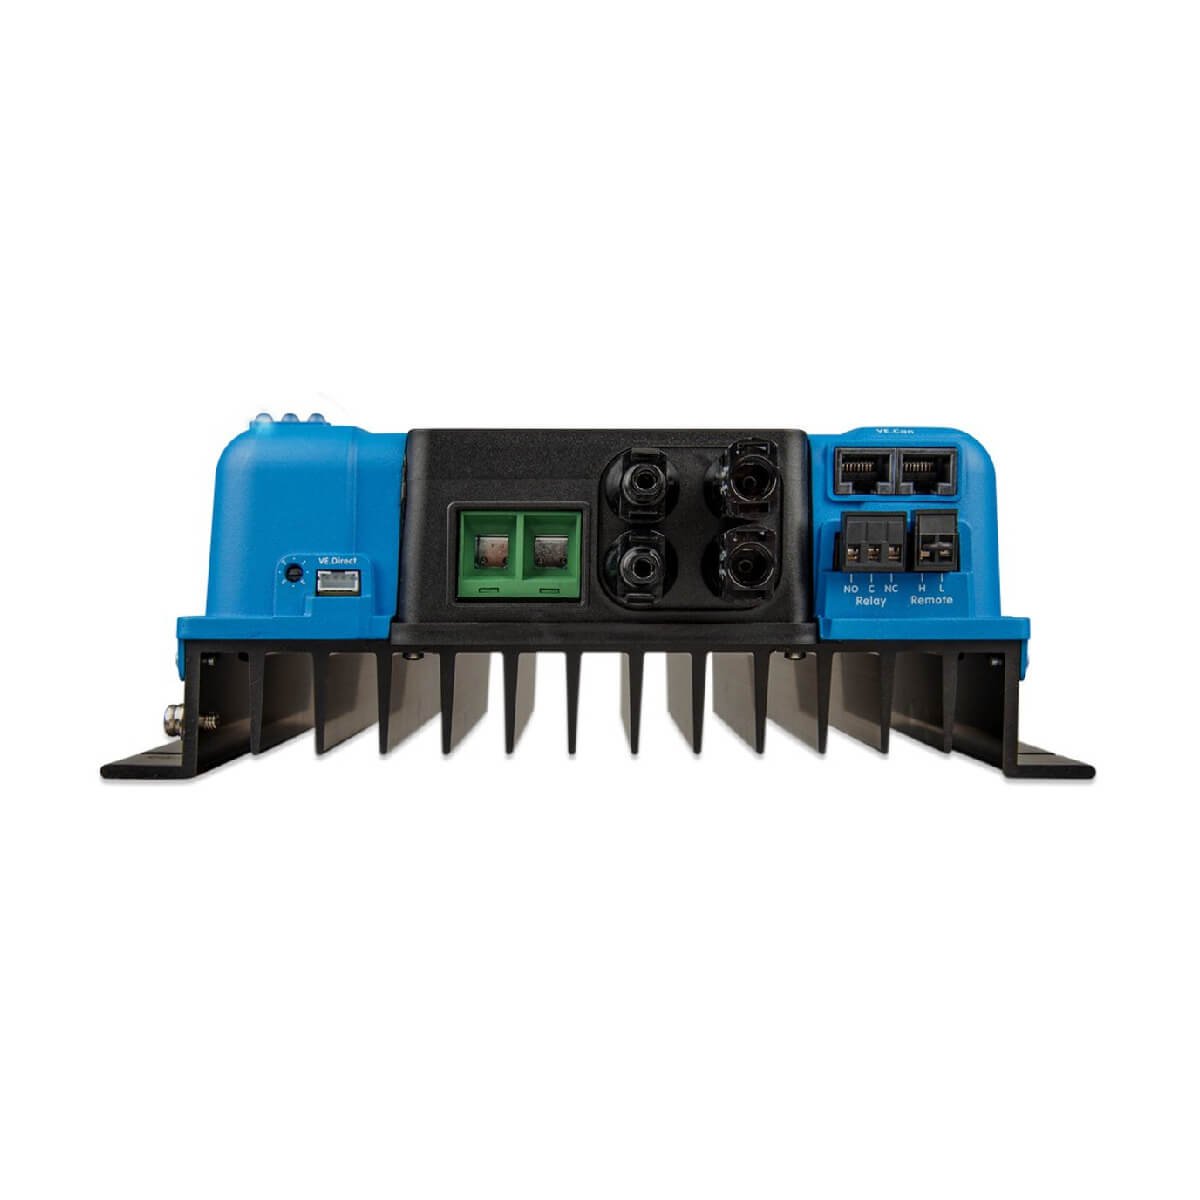 The blue and black Victron MPPT 250/70 - SmartSolar Charge Controller - MC4 VE.Can electronic device features multiple ports and connectors on the front, along with a cooling finned base.